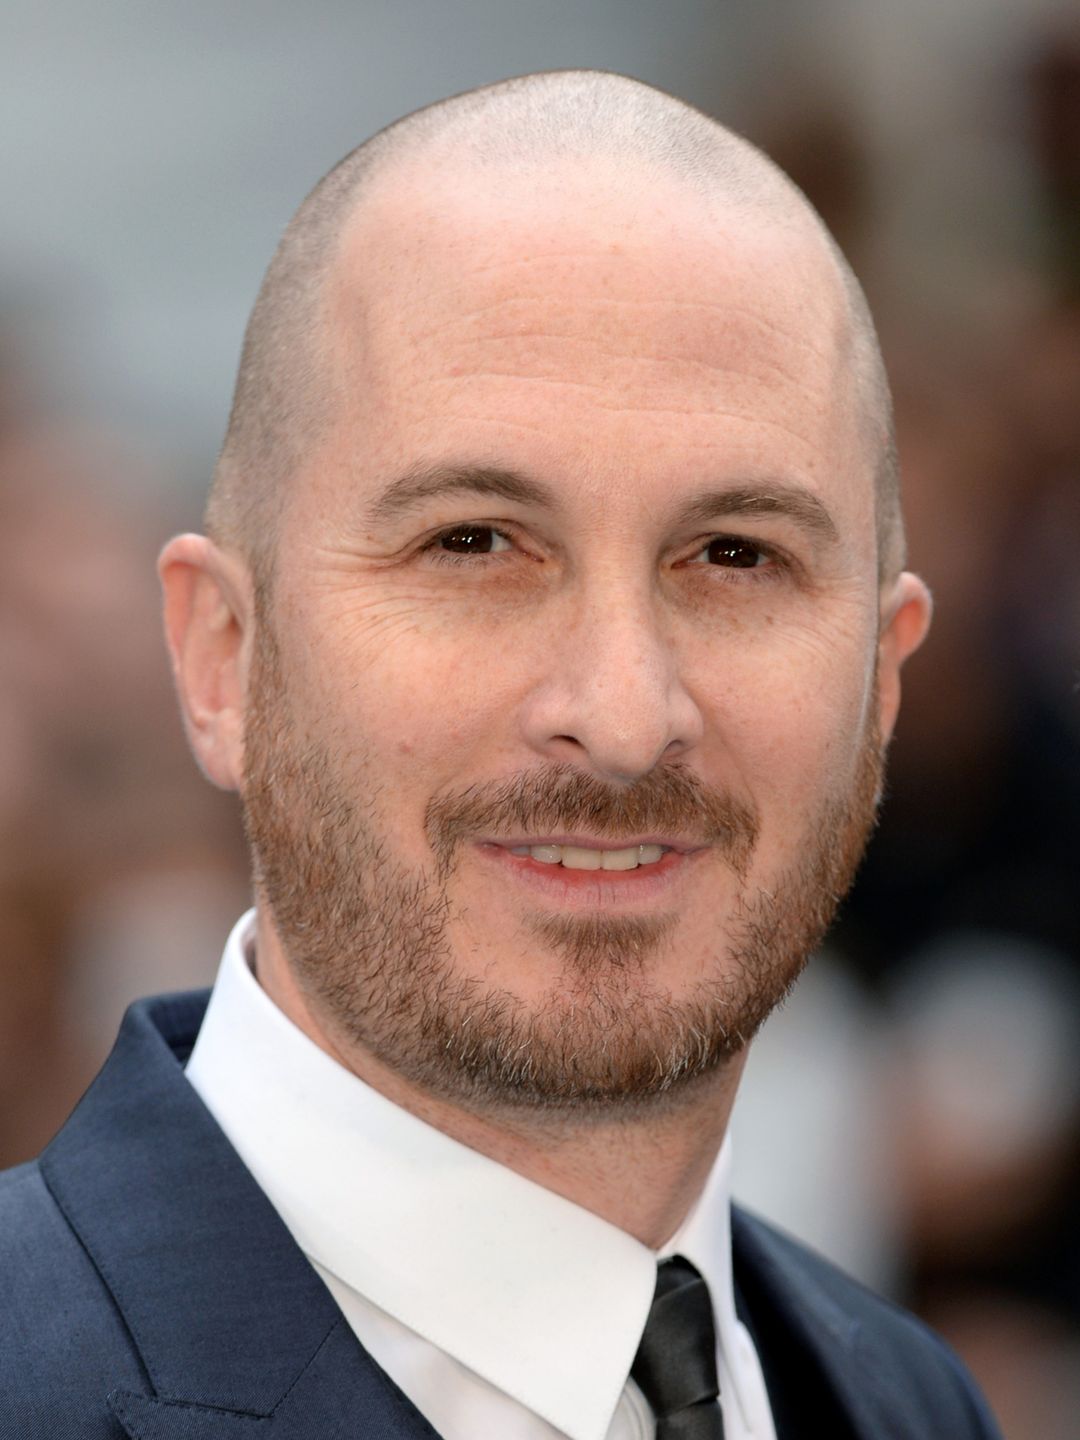 Darren Aronofsky who is his father